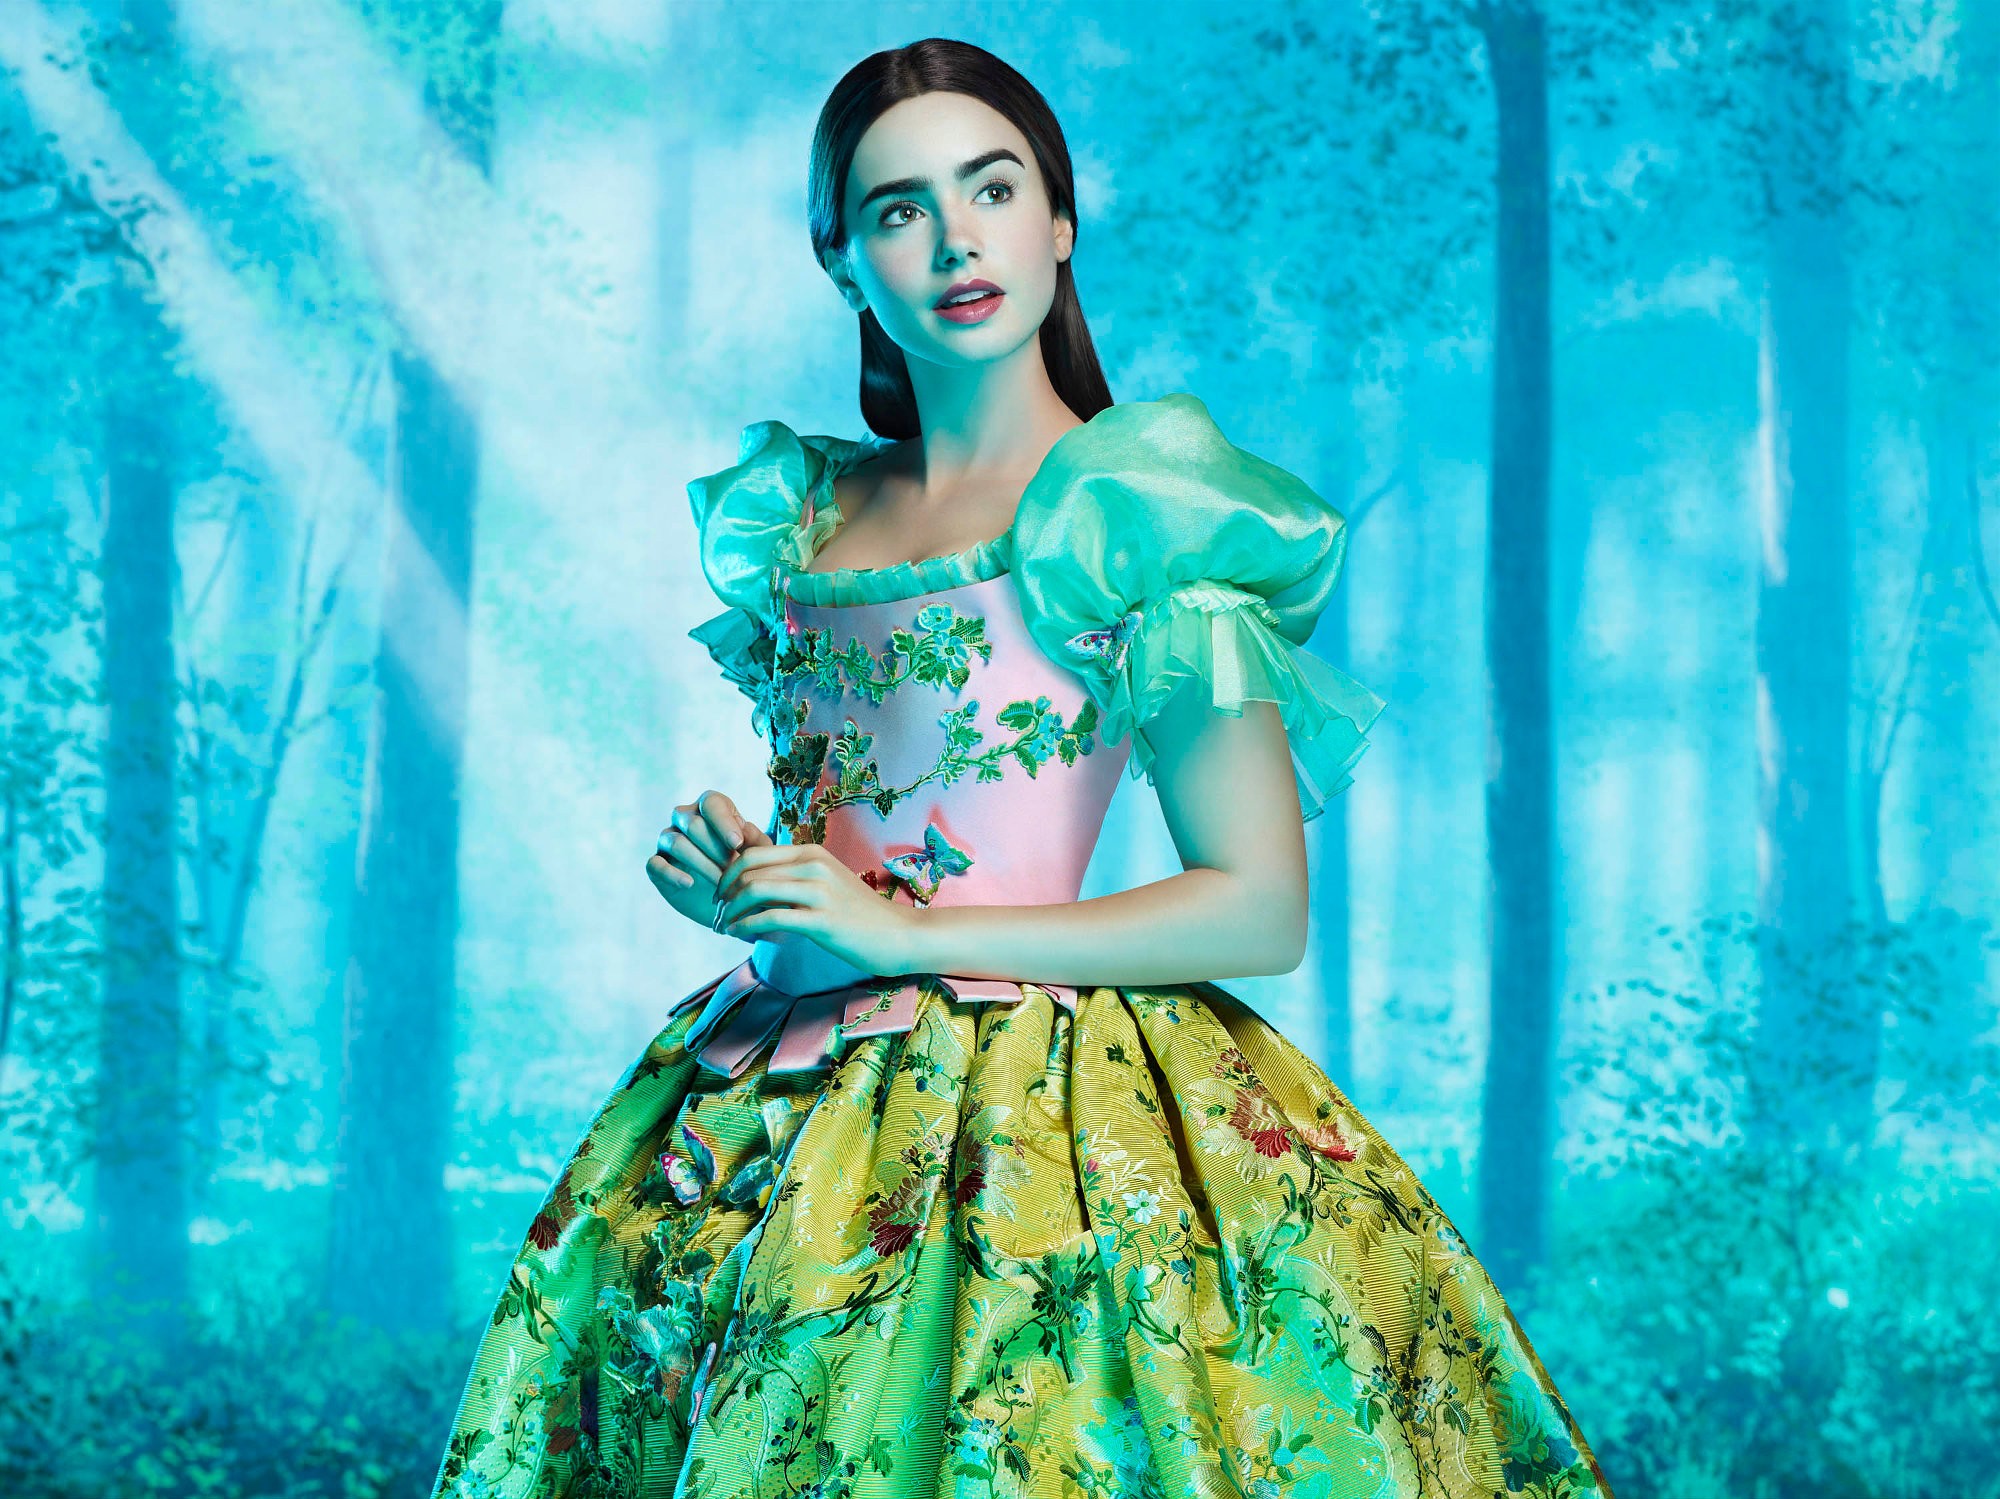 Lily Collins stars as Snow White in Relativity Media's Mirror Mirror (2012). Photo credit by Matthew Rolston.